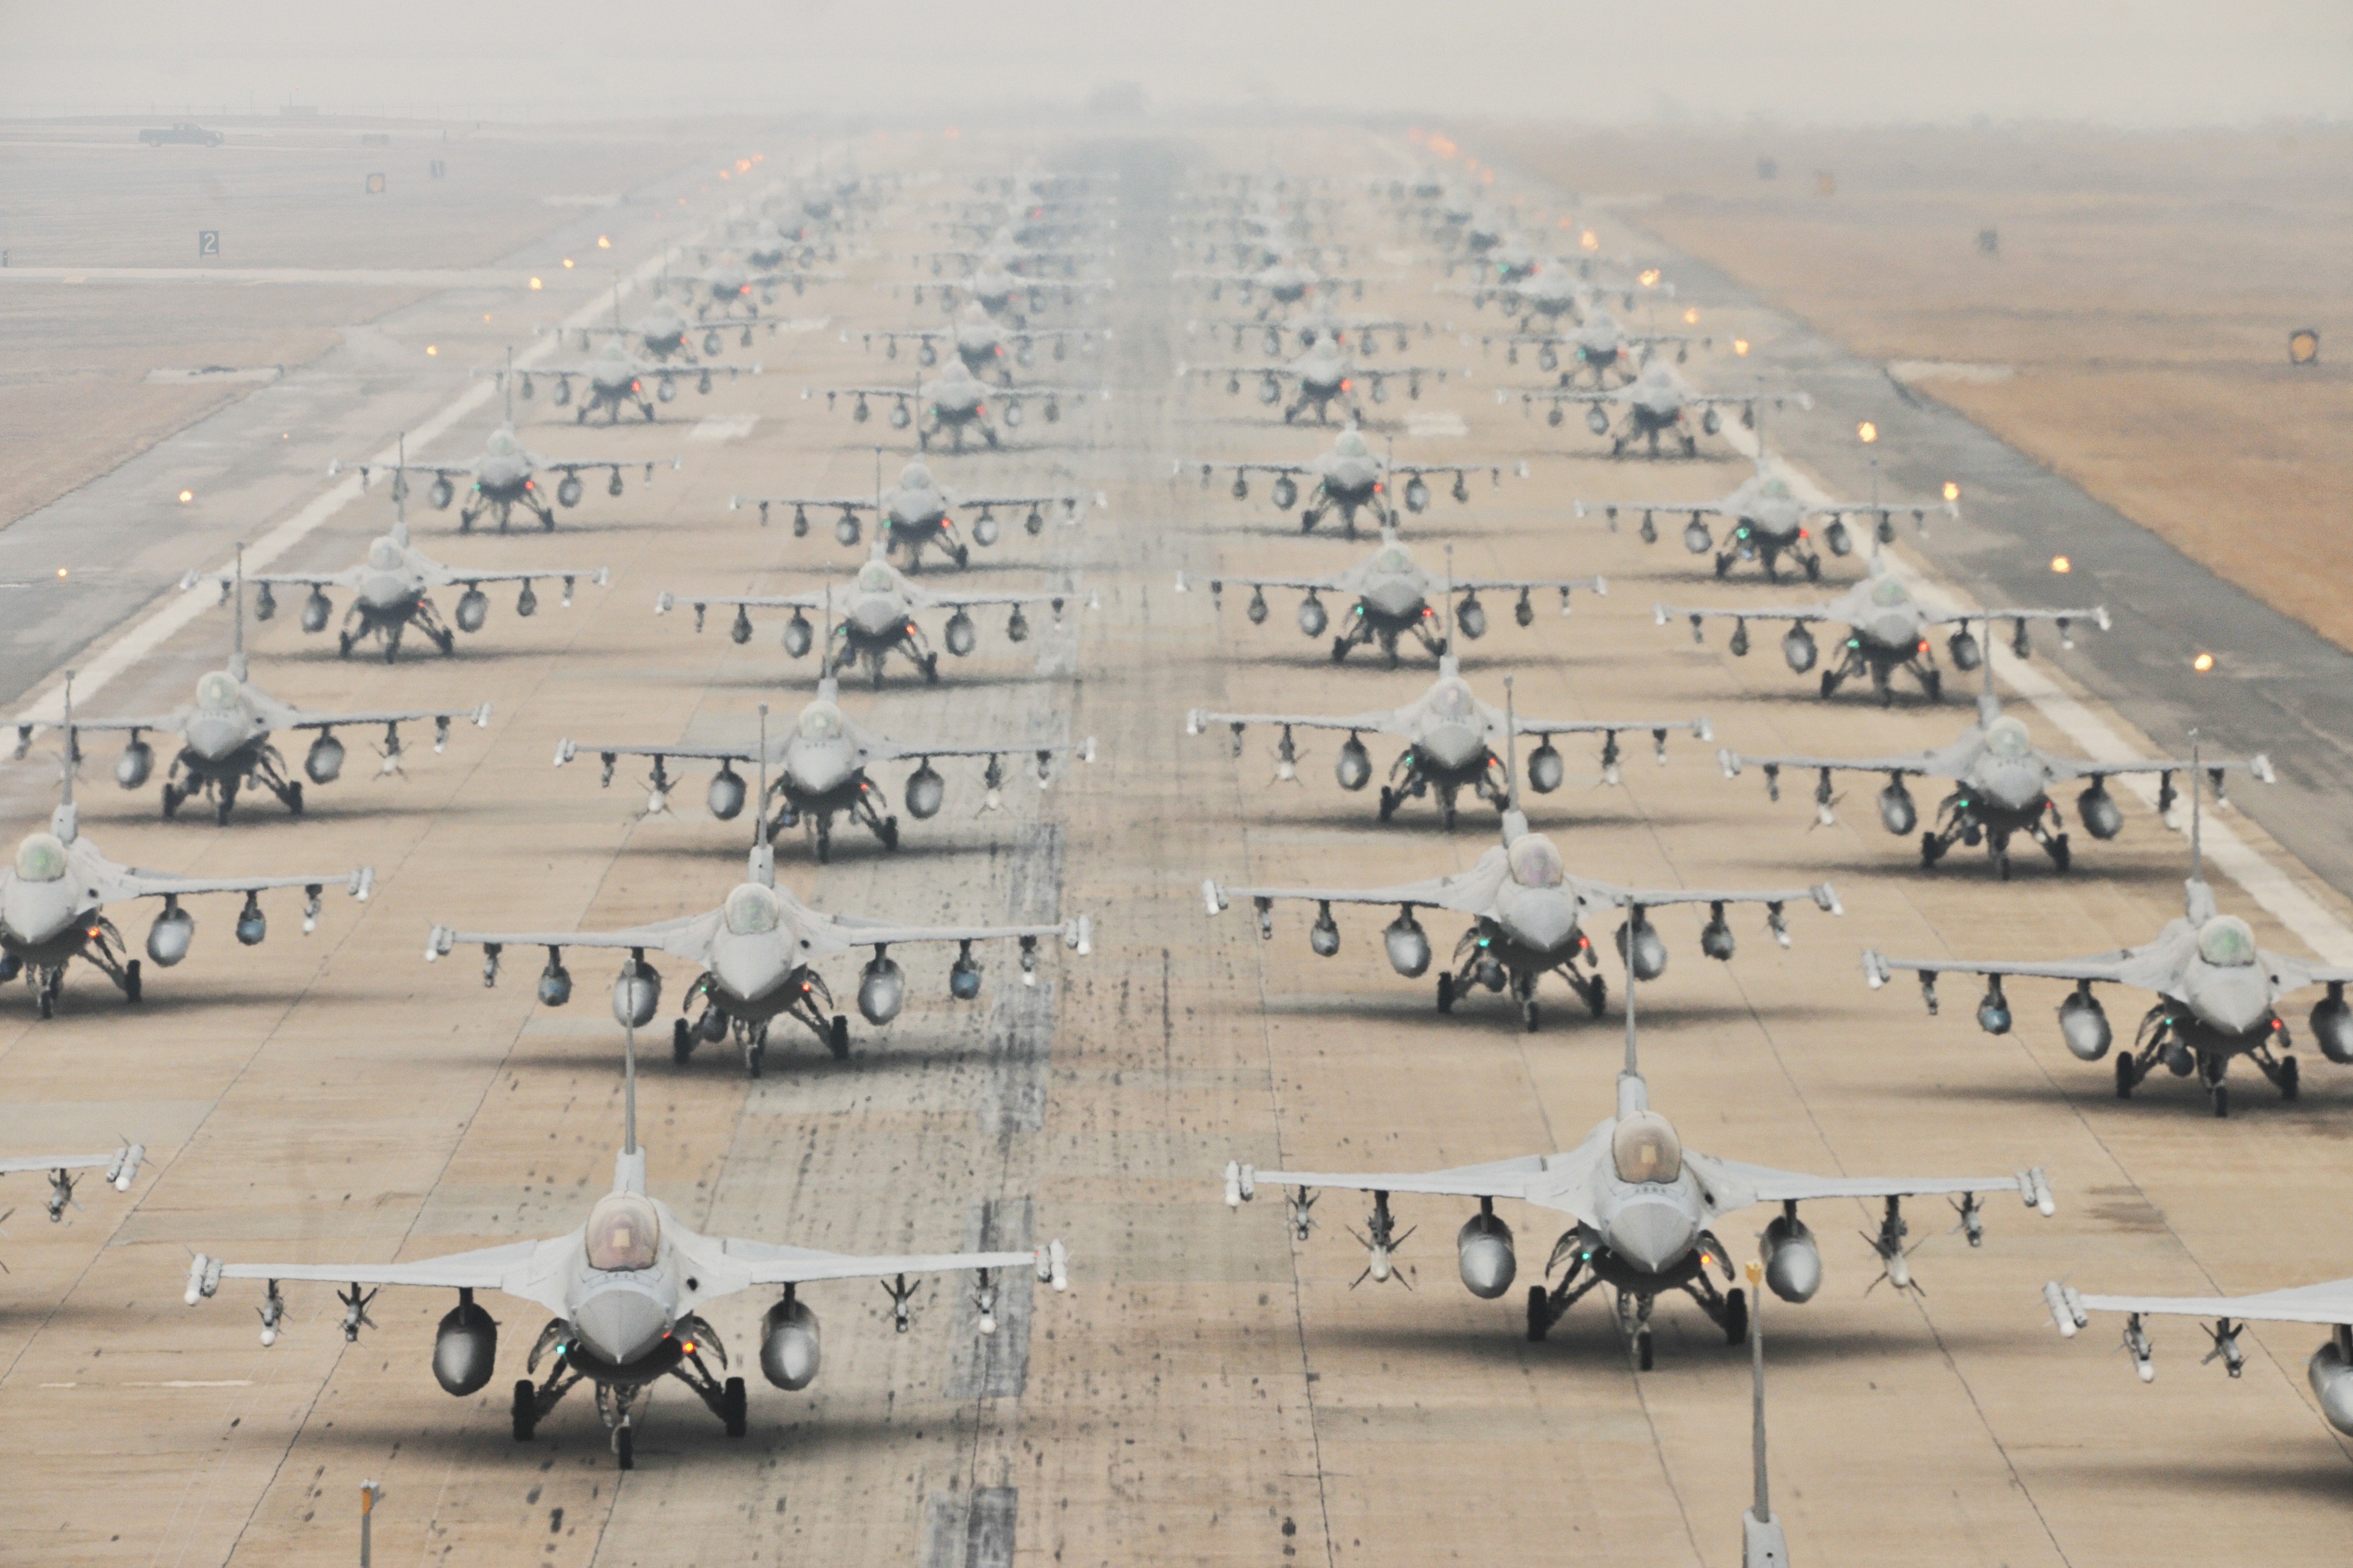 Military jets on the runway photo